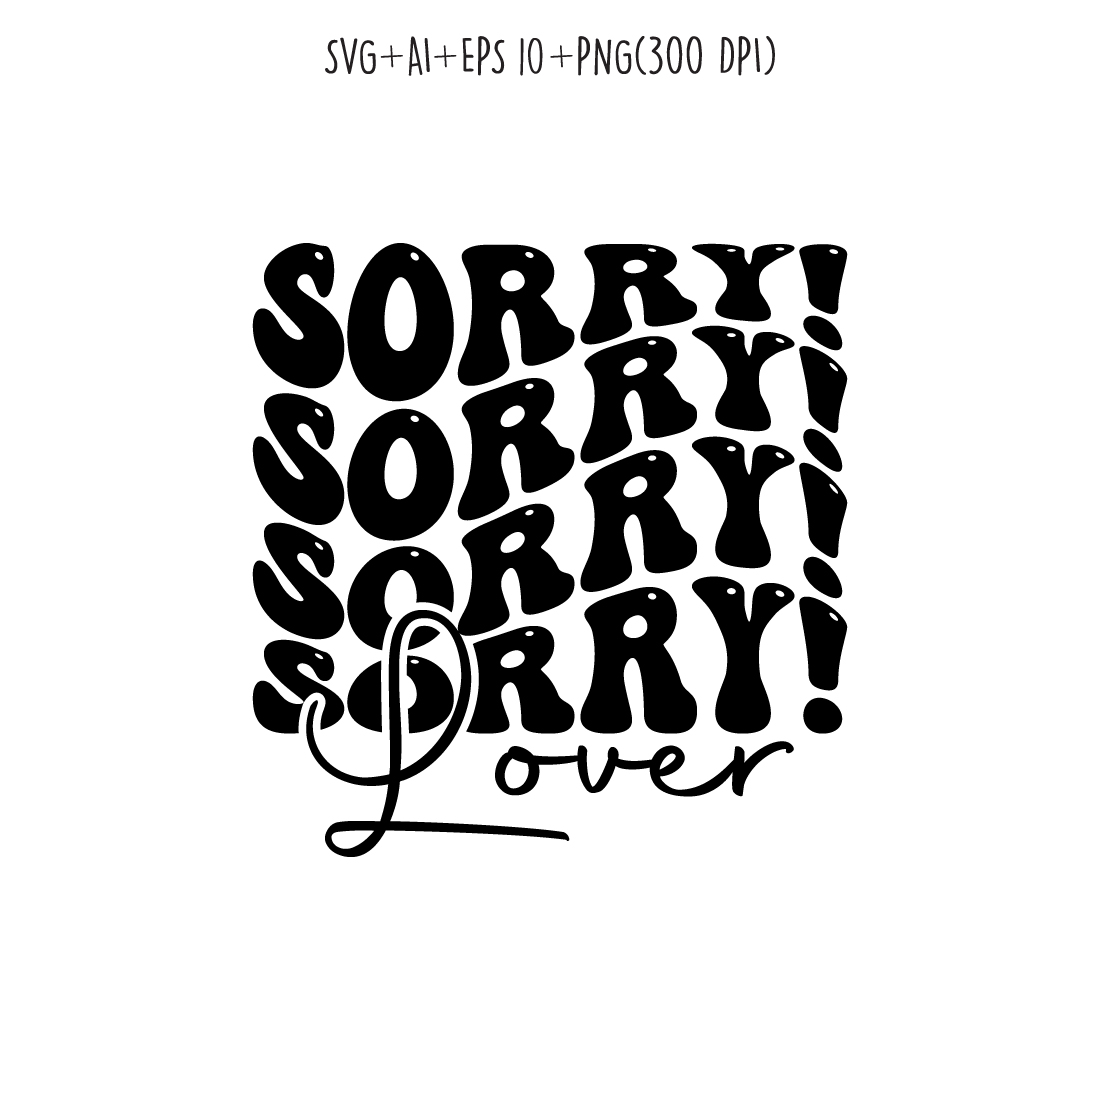 Sorry lover typography indoor game design for t-shirts, cards ...